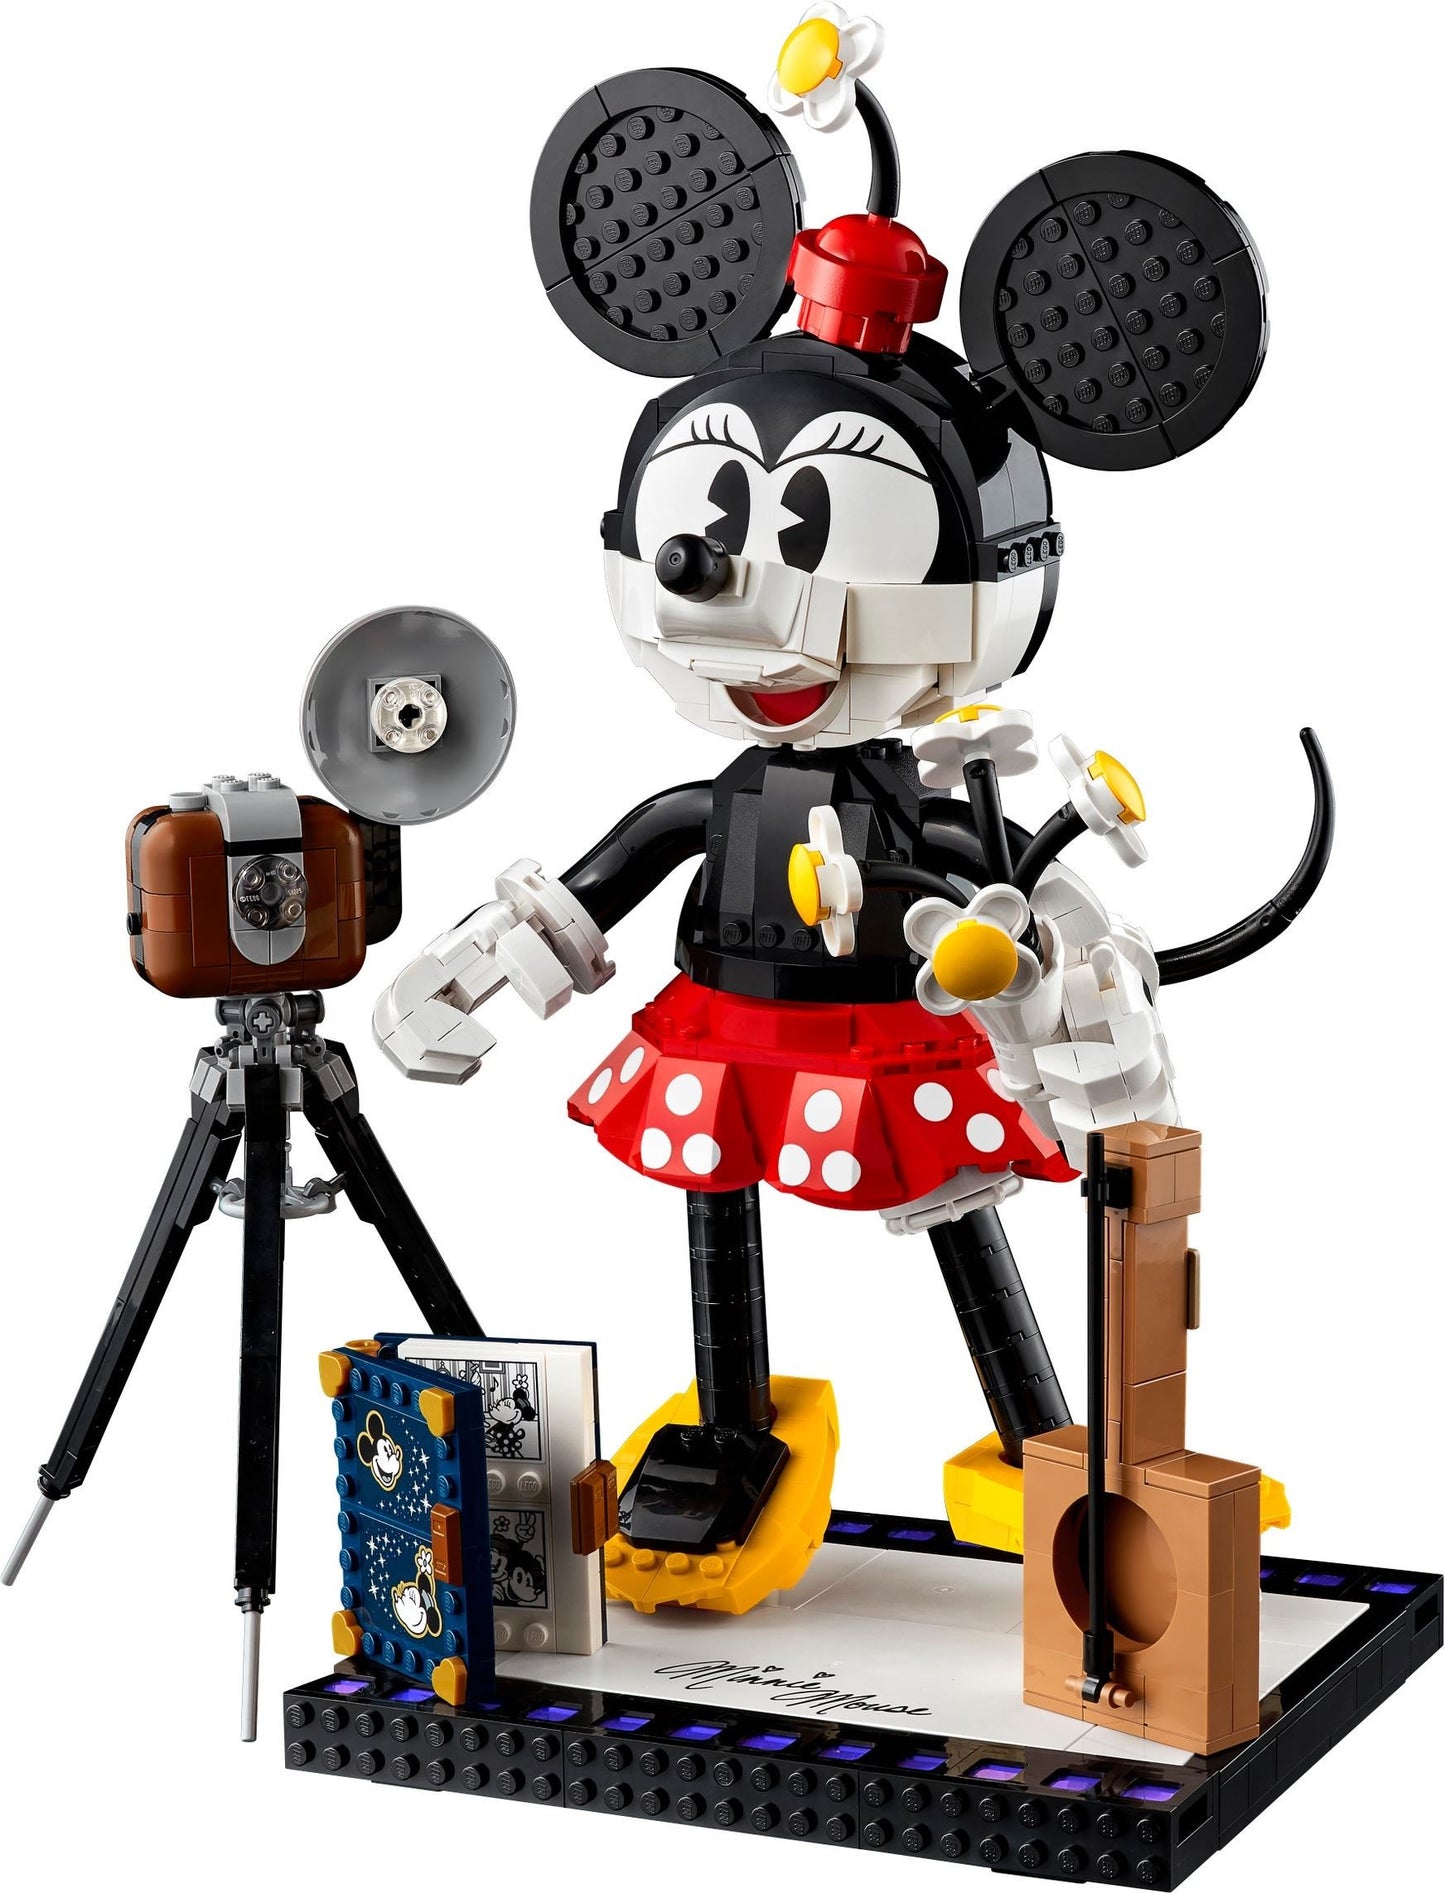 Mickey Mouse & Minnie Mouse personages